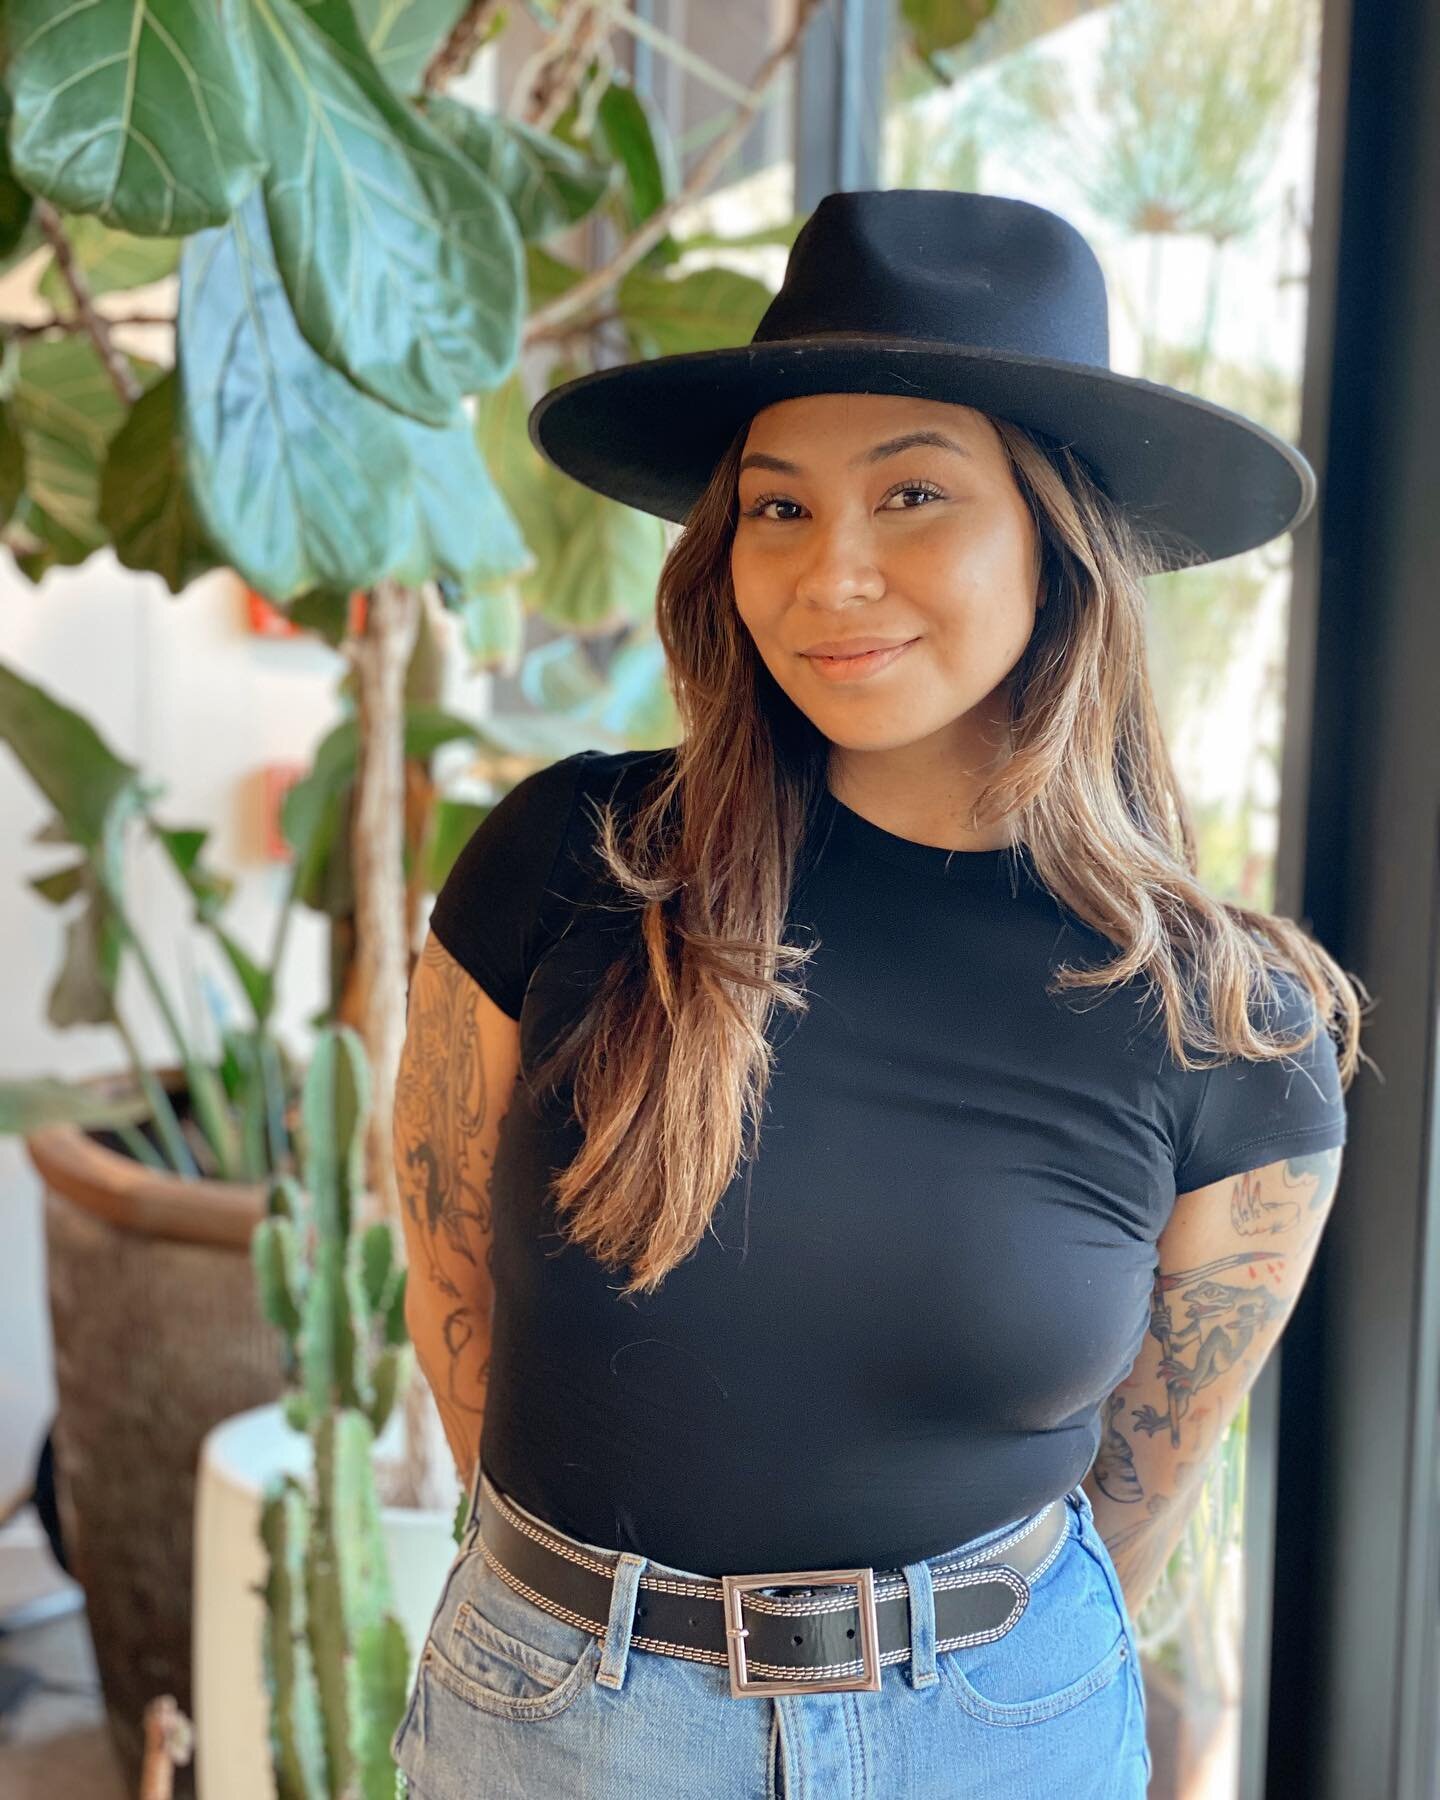 We are so excited to welcome Celine to the Grove family! 💚 She&rsquo;s an expert at perfectly lived in color ✨ Give her a follow at @cfghair and call or email us to get on her books!
&bull;
&bull;
&bull;

#GroveSalon #GreenAtGrove #GorgeousAtGrove #